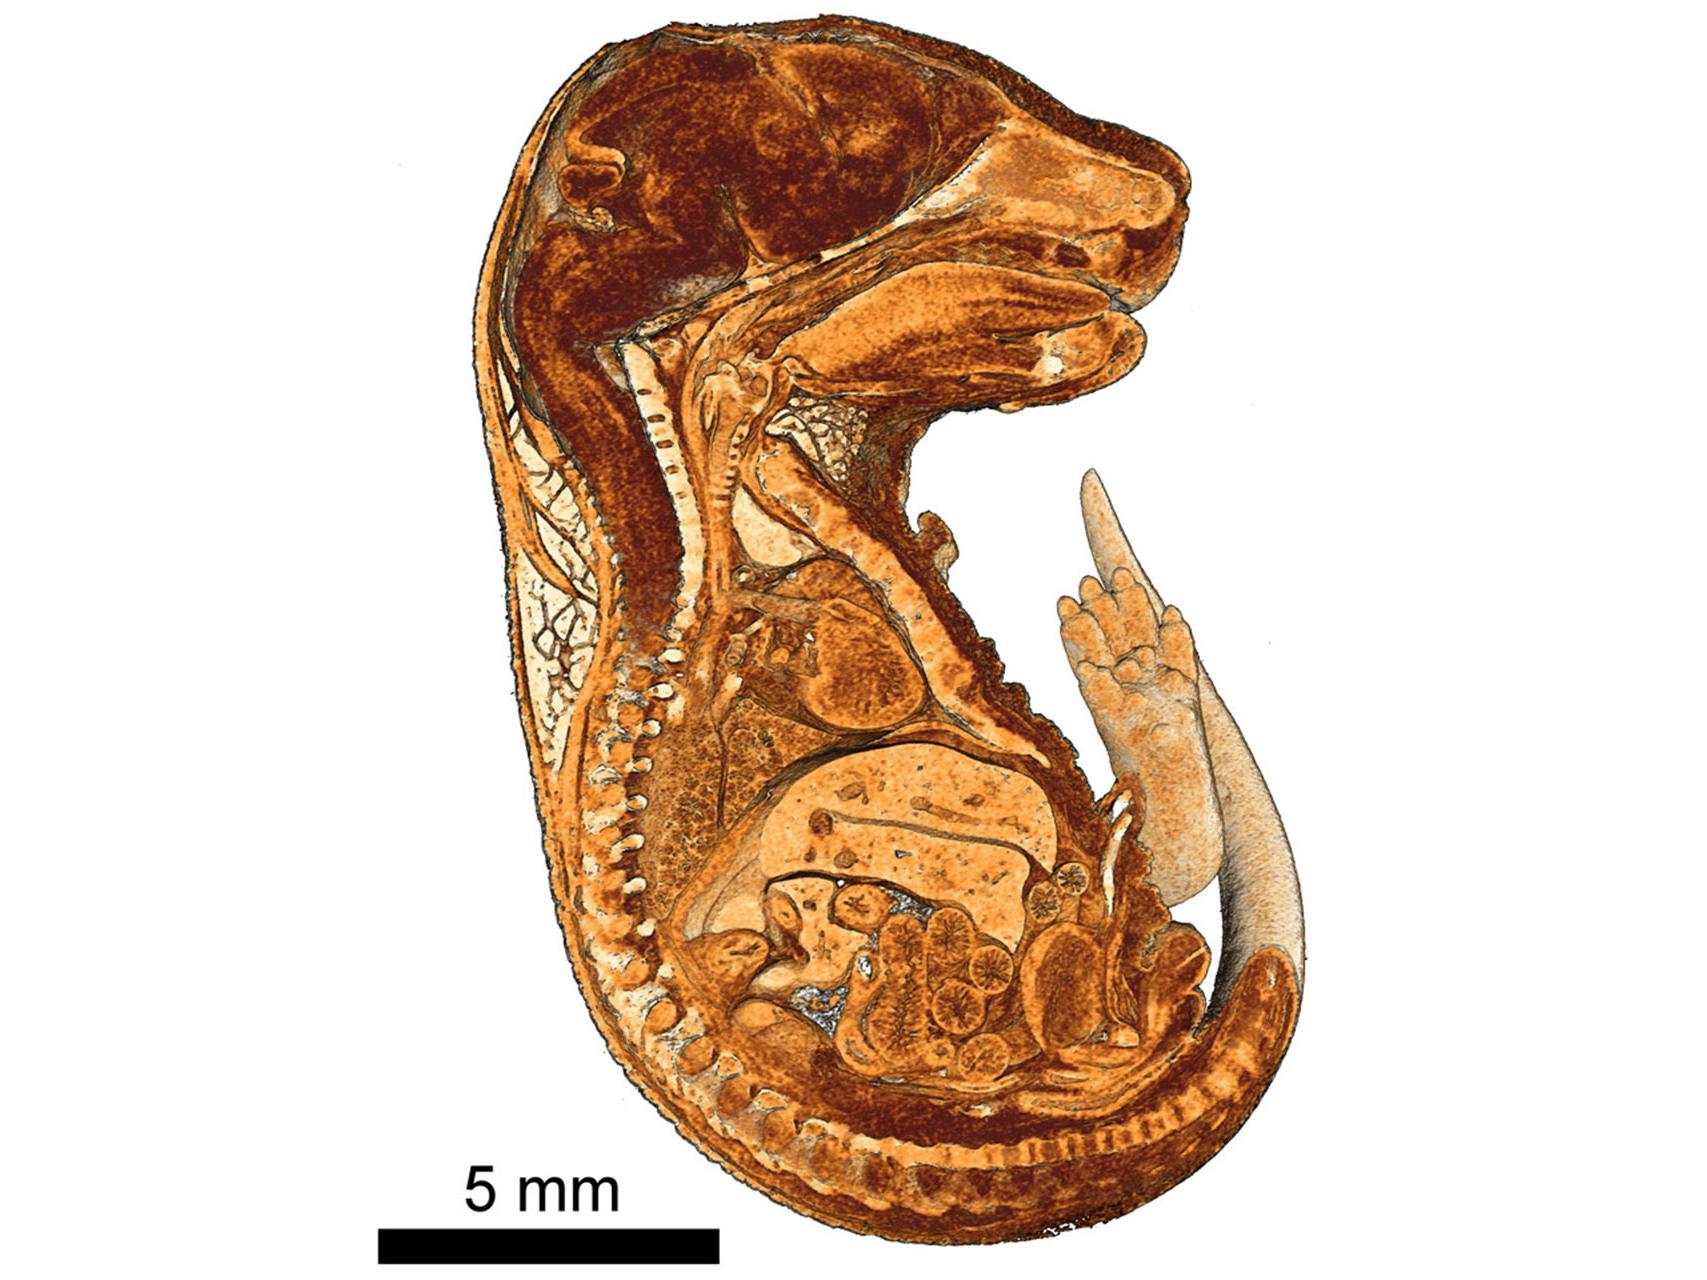 Cutaway view of 3D rendering of a mouse embryo embedded in paraffin